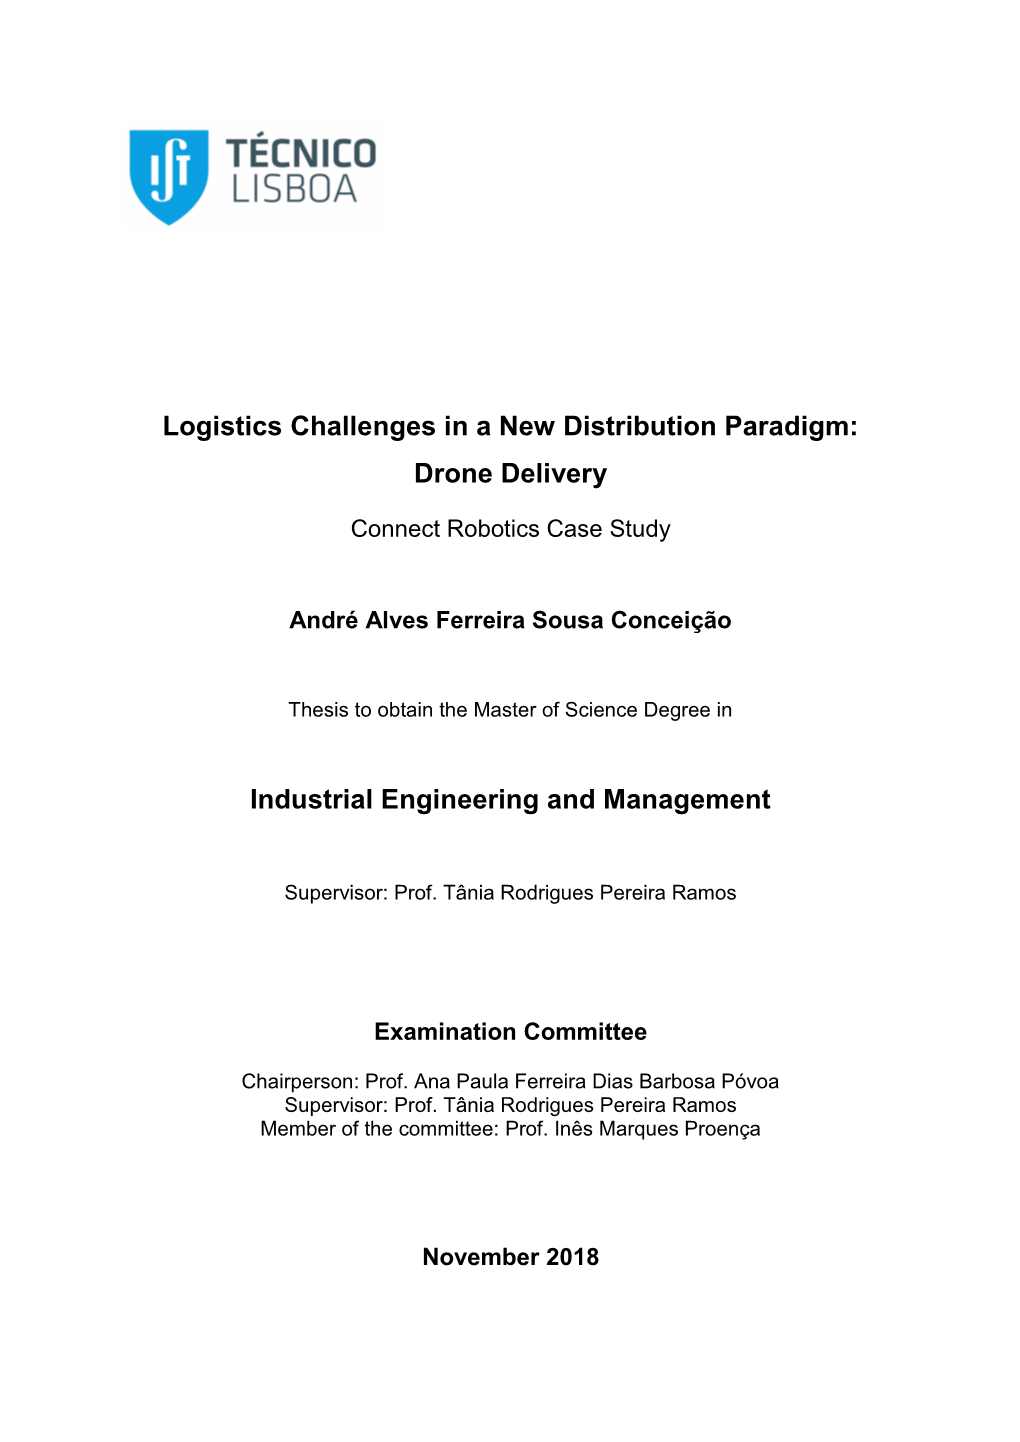 Logistics Challenges in a New Distribution Paradigm: Drone Delivery